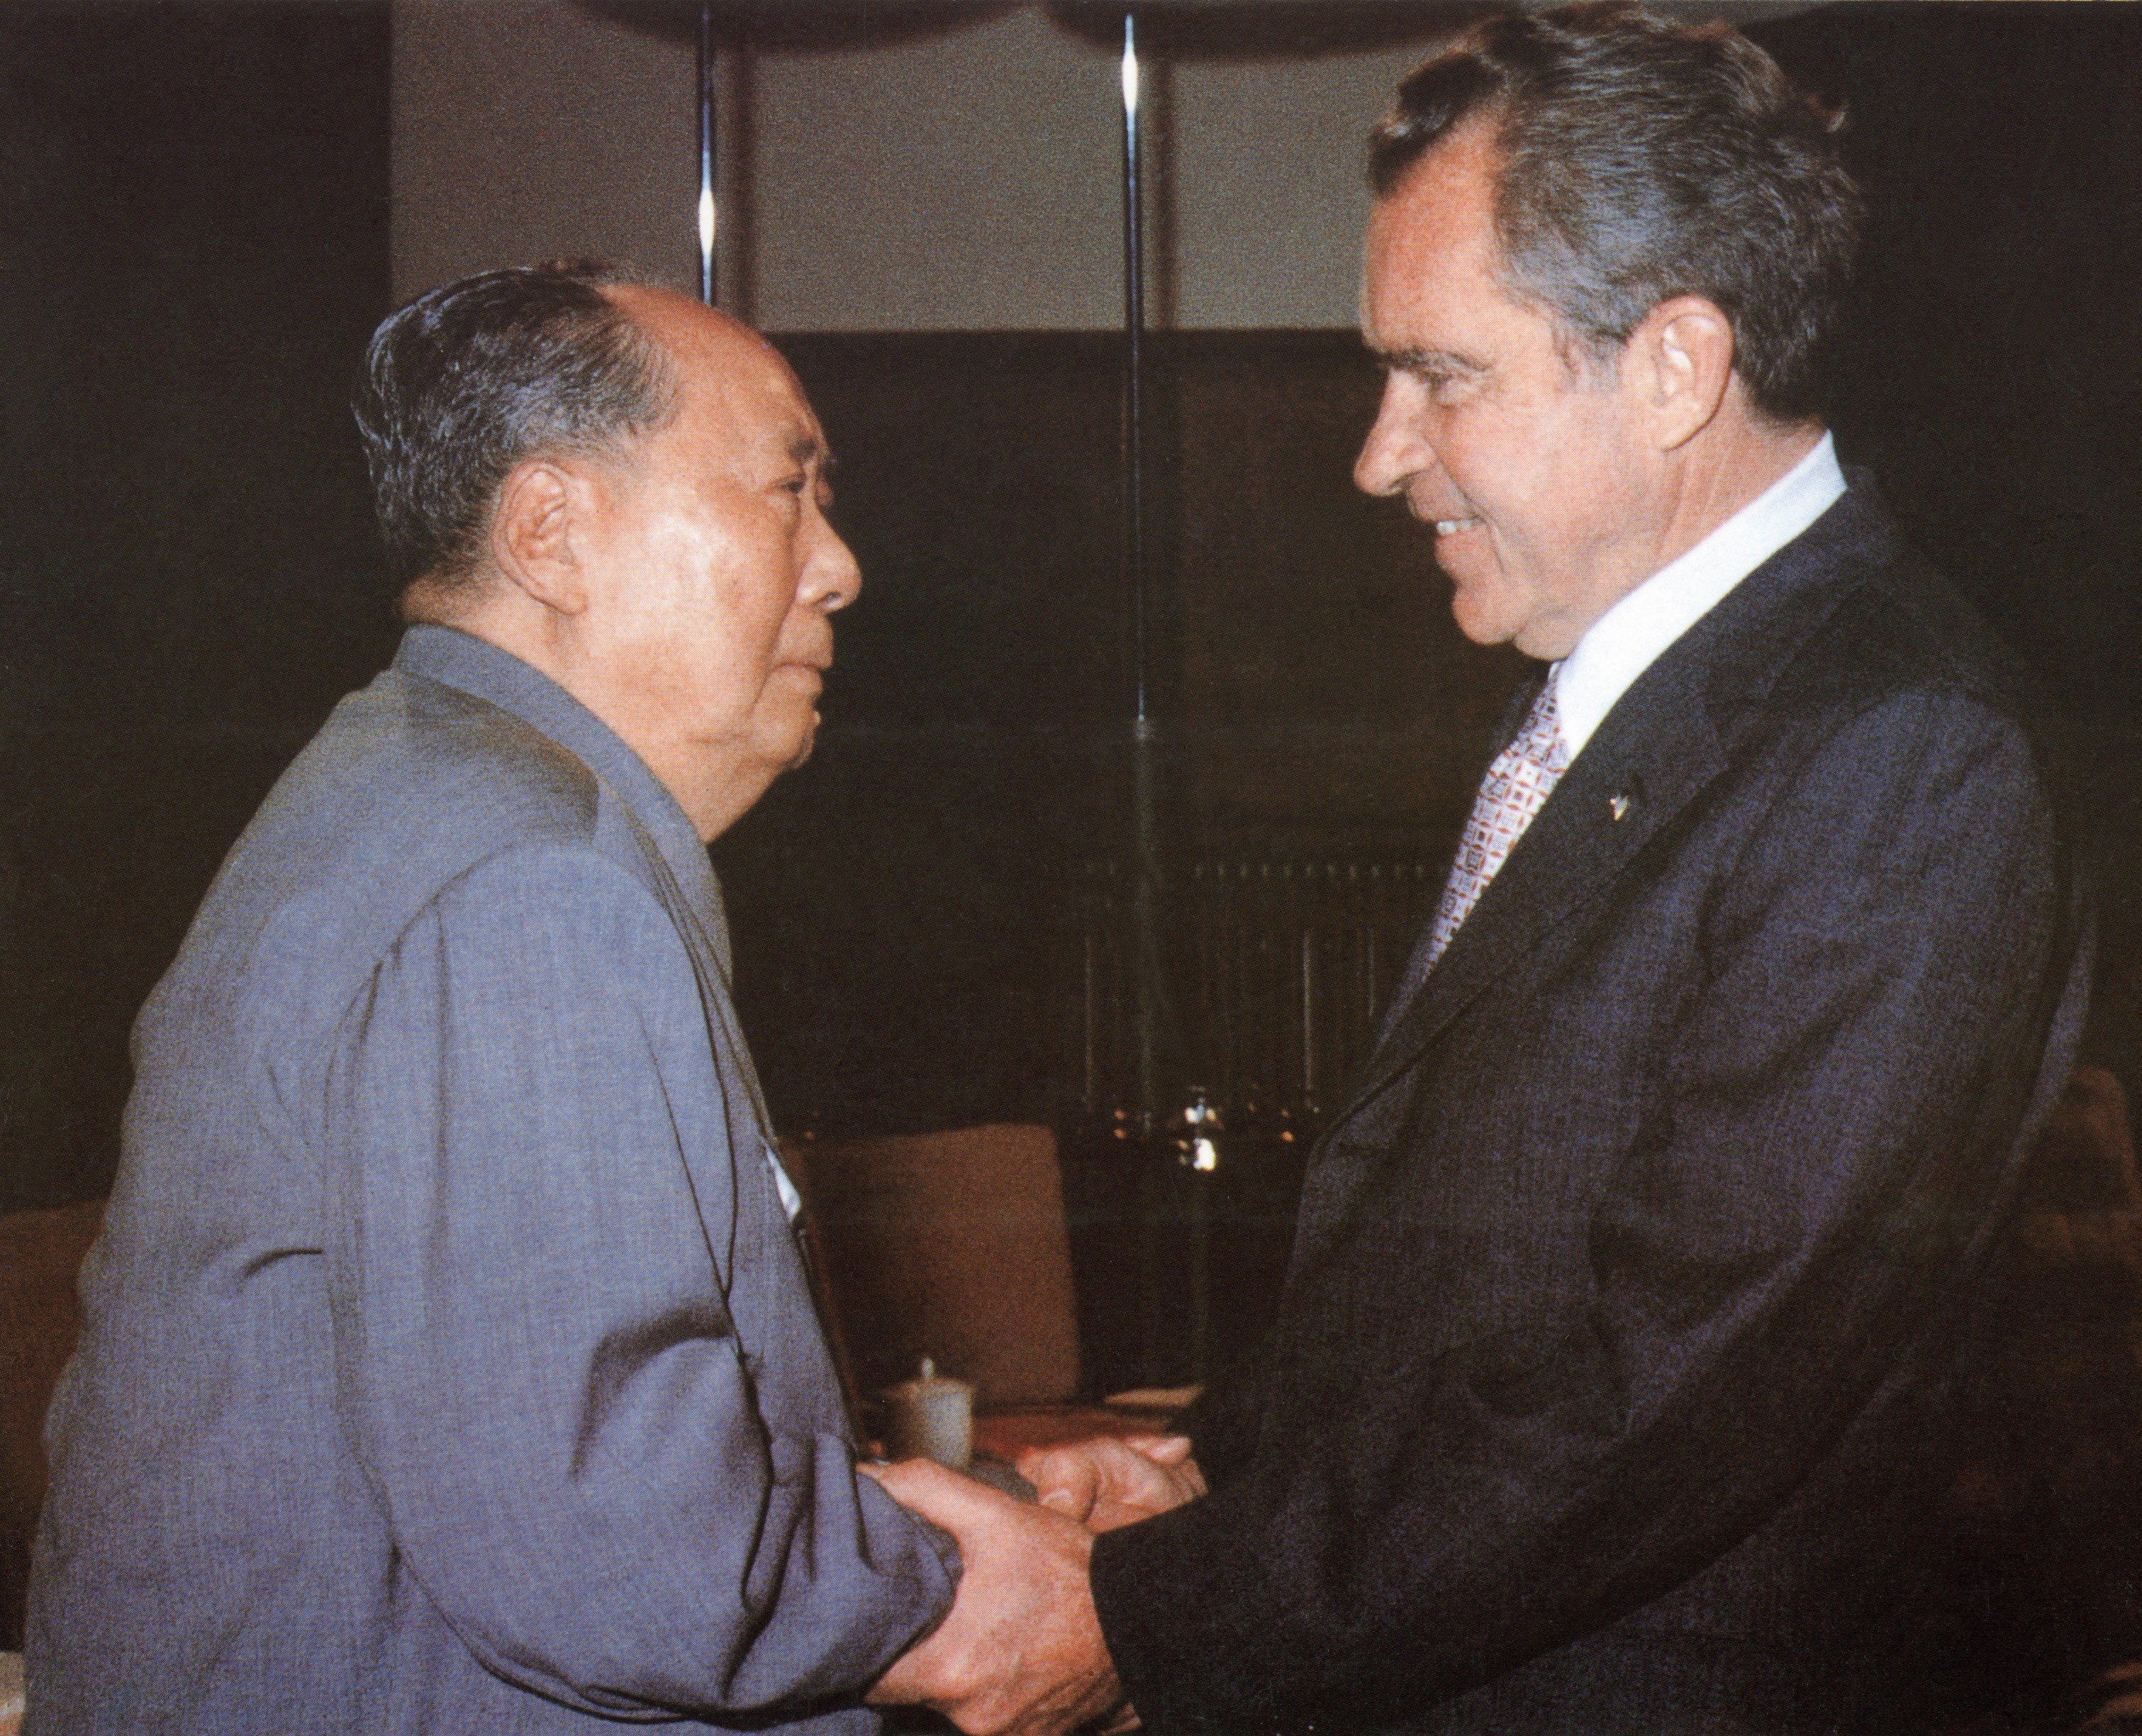 Mao Zedong welcomes US President Richard Nixon. Michael J. Green praises Nixon as a deep geopolitical strategist in his new book about America in the Pacific. Photo: AFP